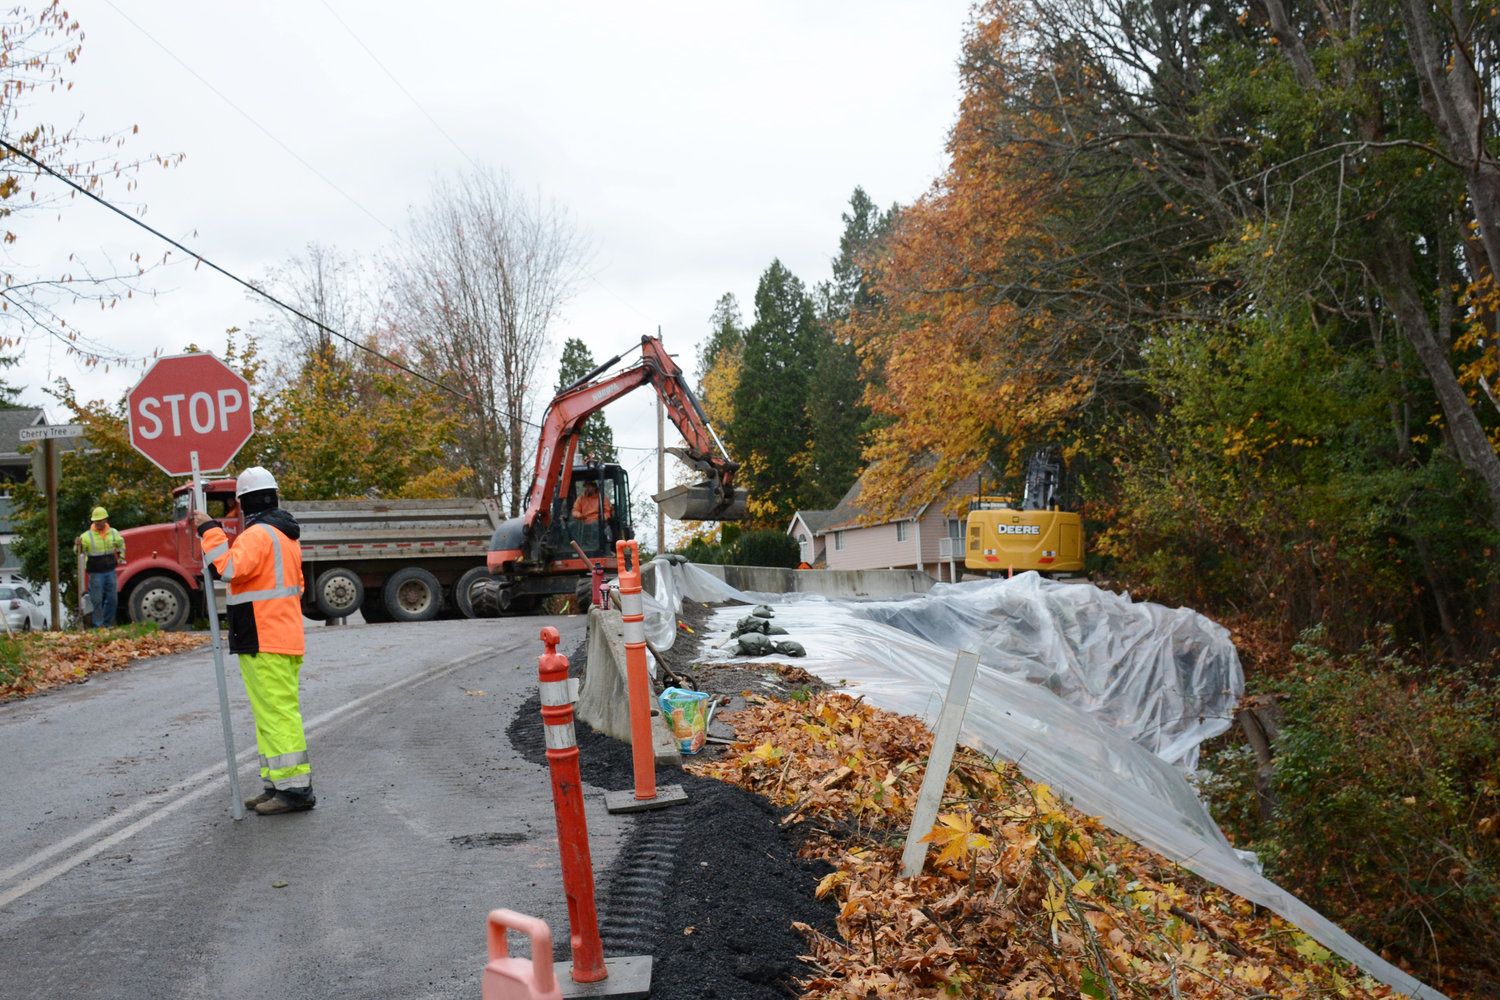 Stremler Gravel crew lay material for a temporary travel lane on Deer Trail in October 2021 to allow for two-way traffic while Whatcom County Public Works Department makes plans for a permanent fix to eroding roadway.